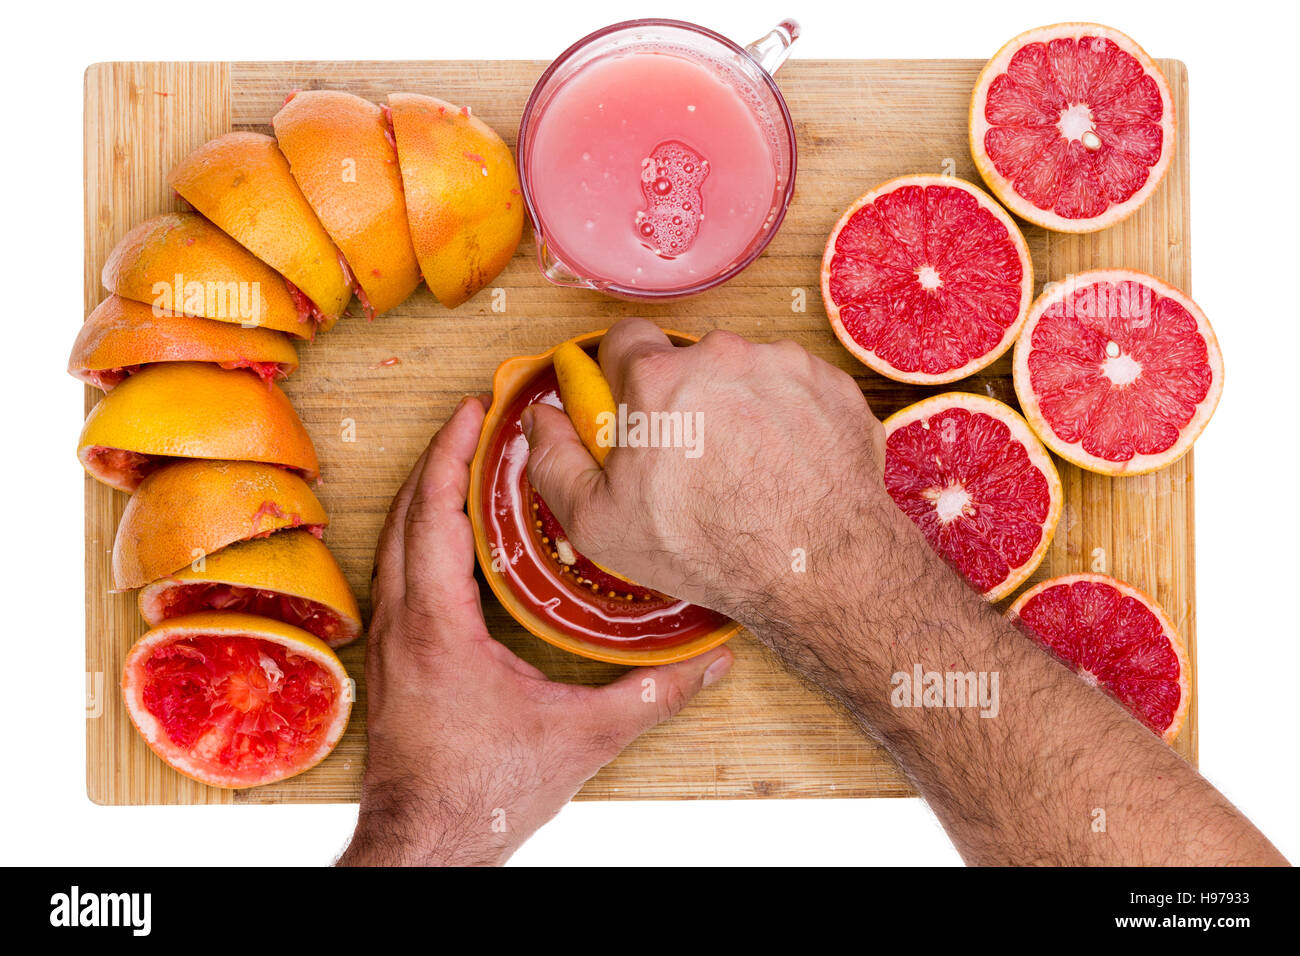 Hands of a man squeezing fresh ruby grapefruit halves on a manual juicer with fresh cut juicy fruit on one side and squeezed skins on the other on a b Stock Photo